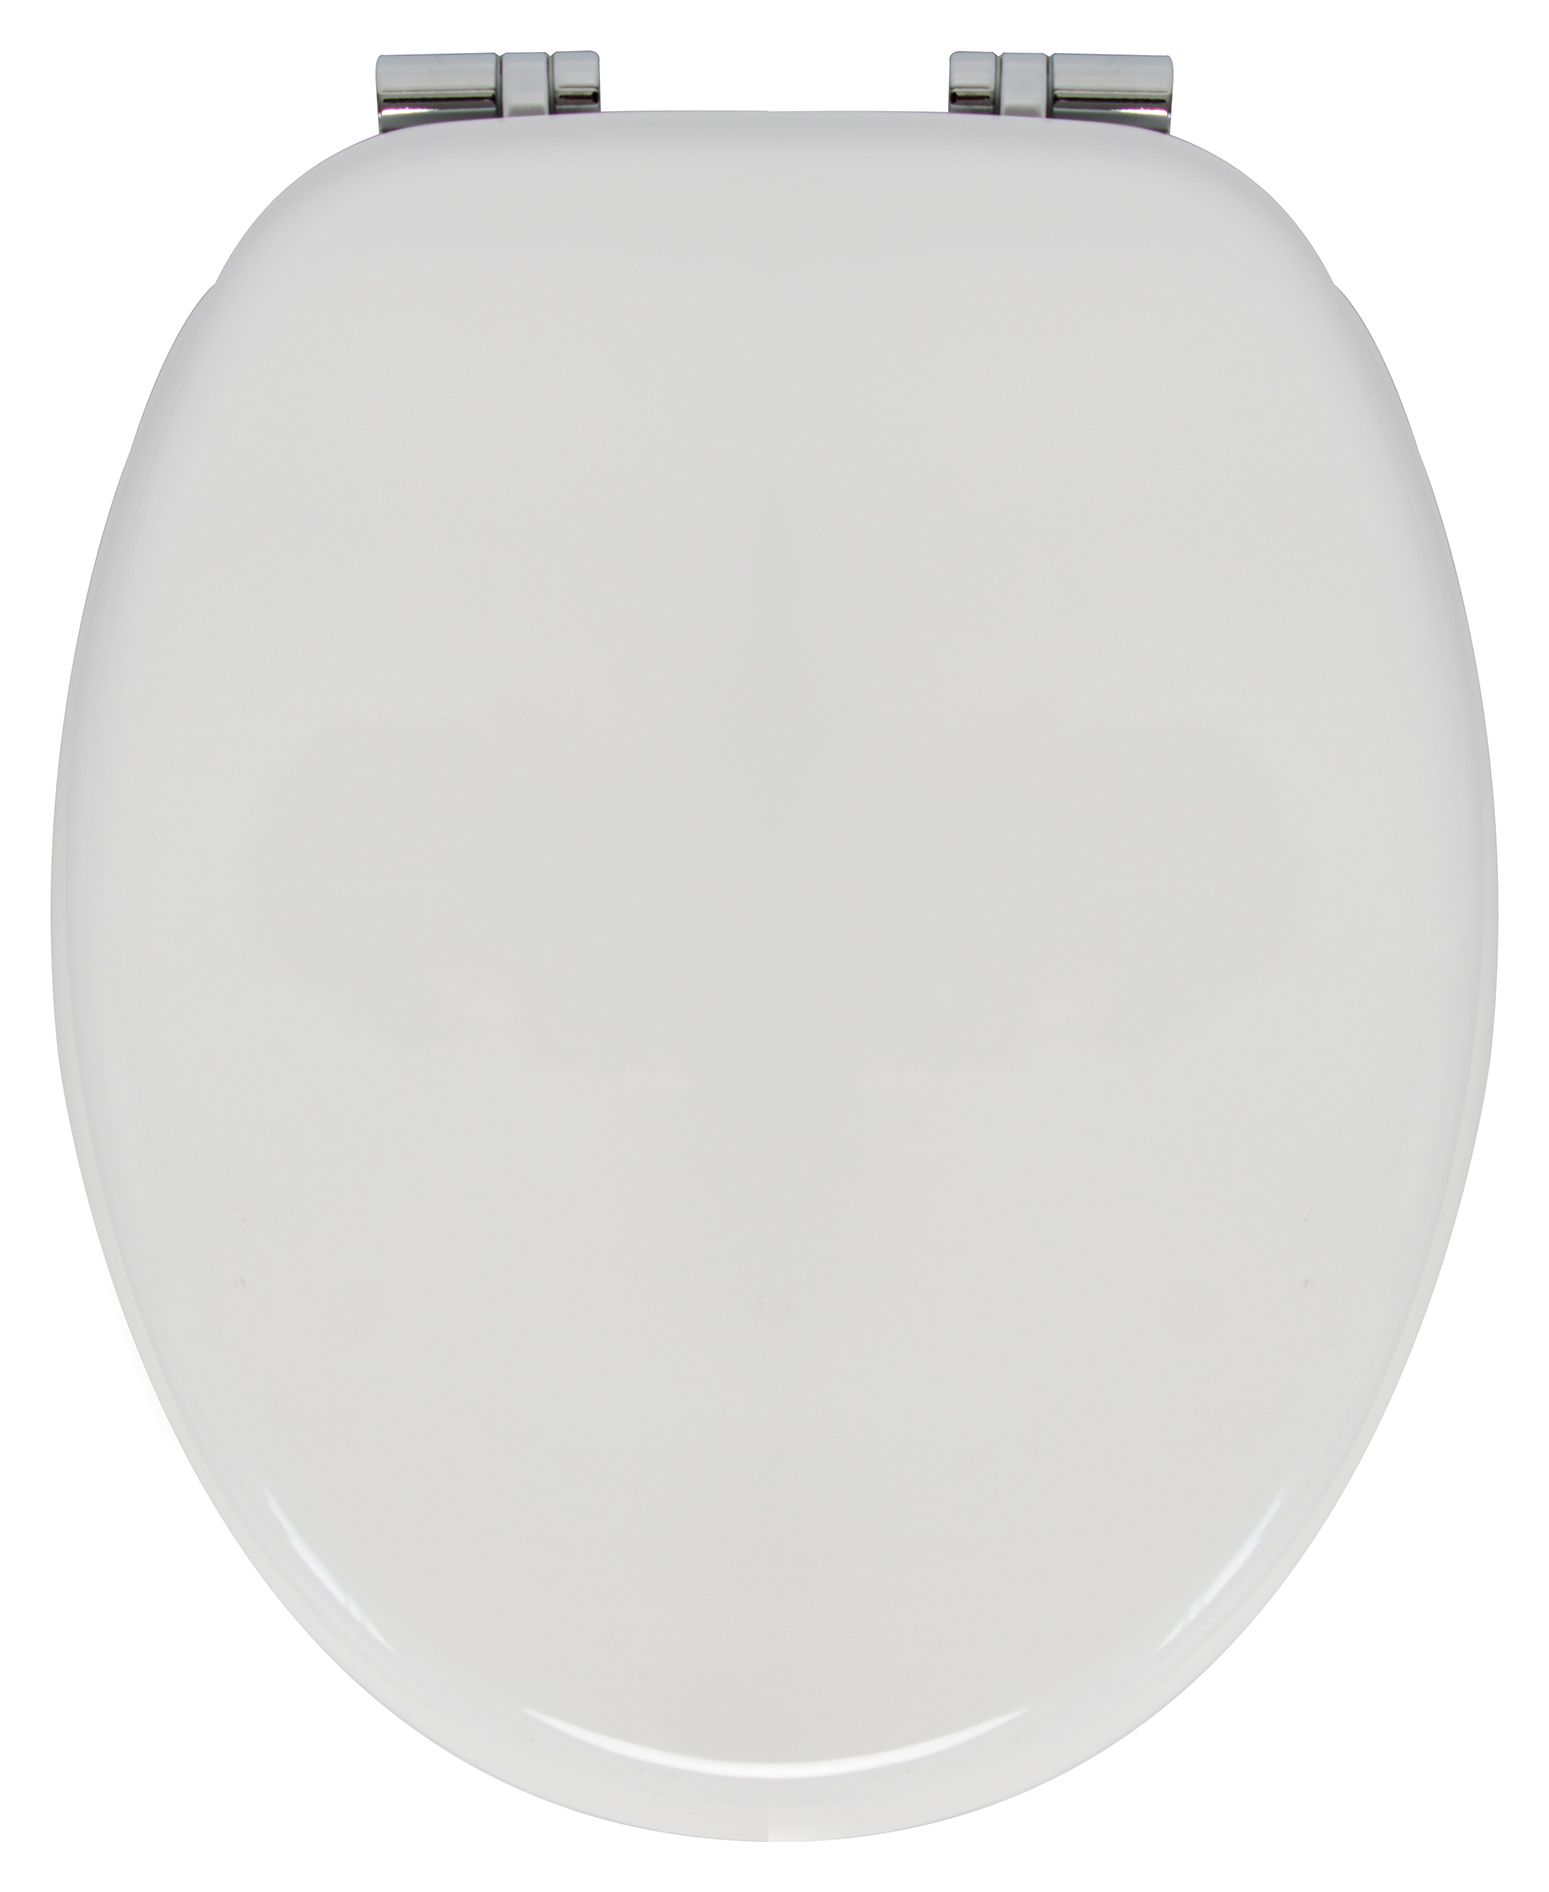 Image of Wickes Wooden Soft Close Toilet Seat - White